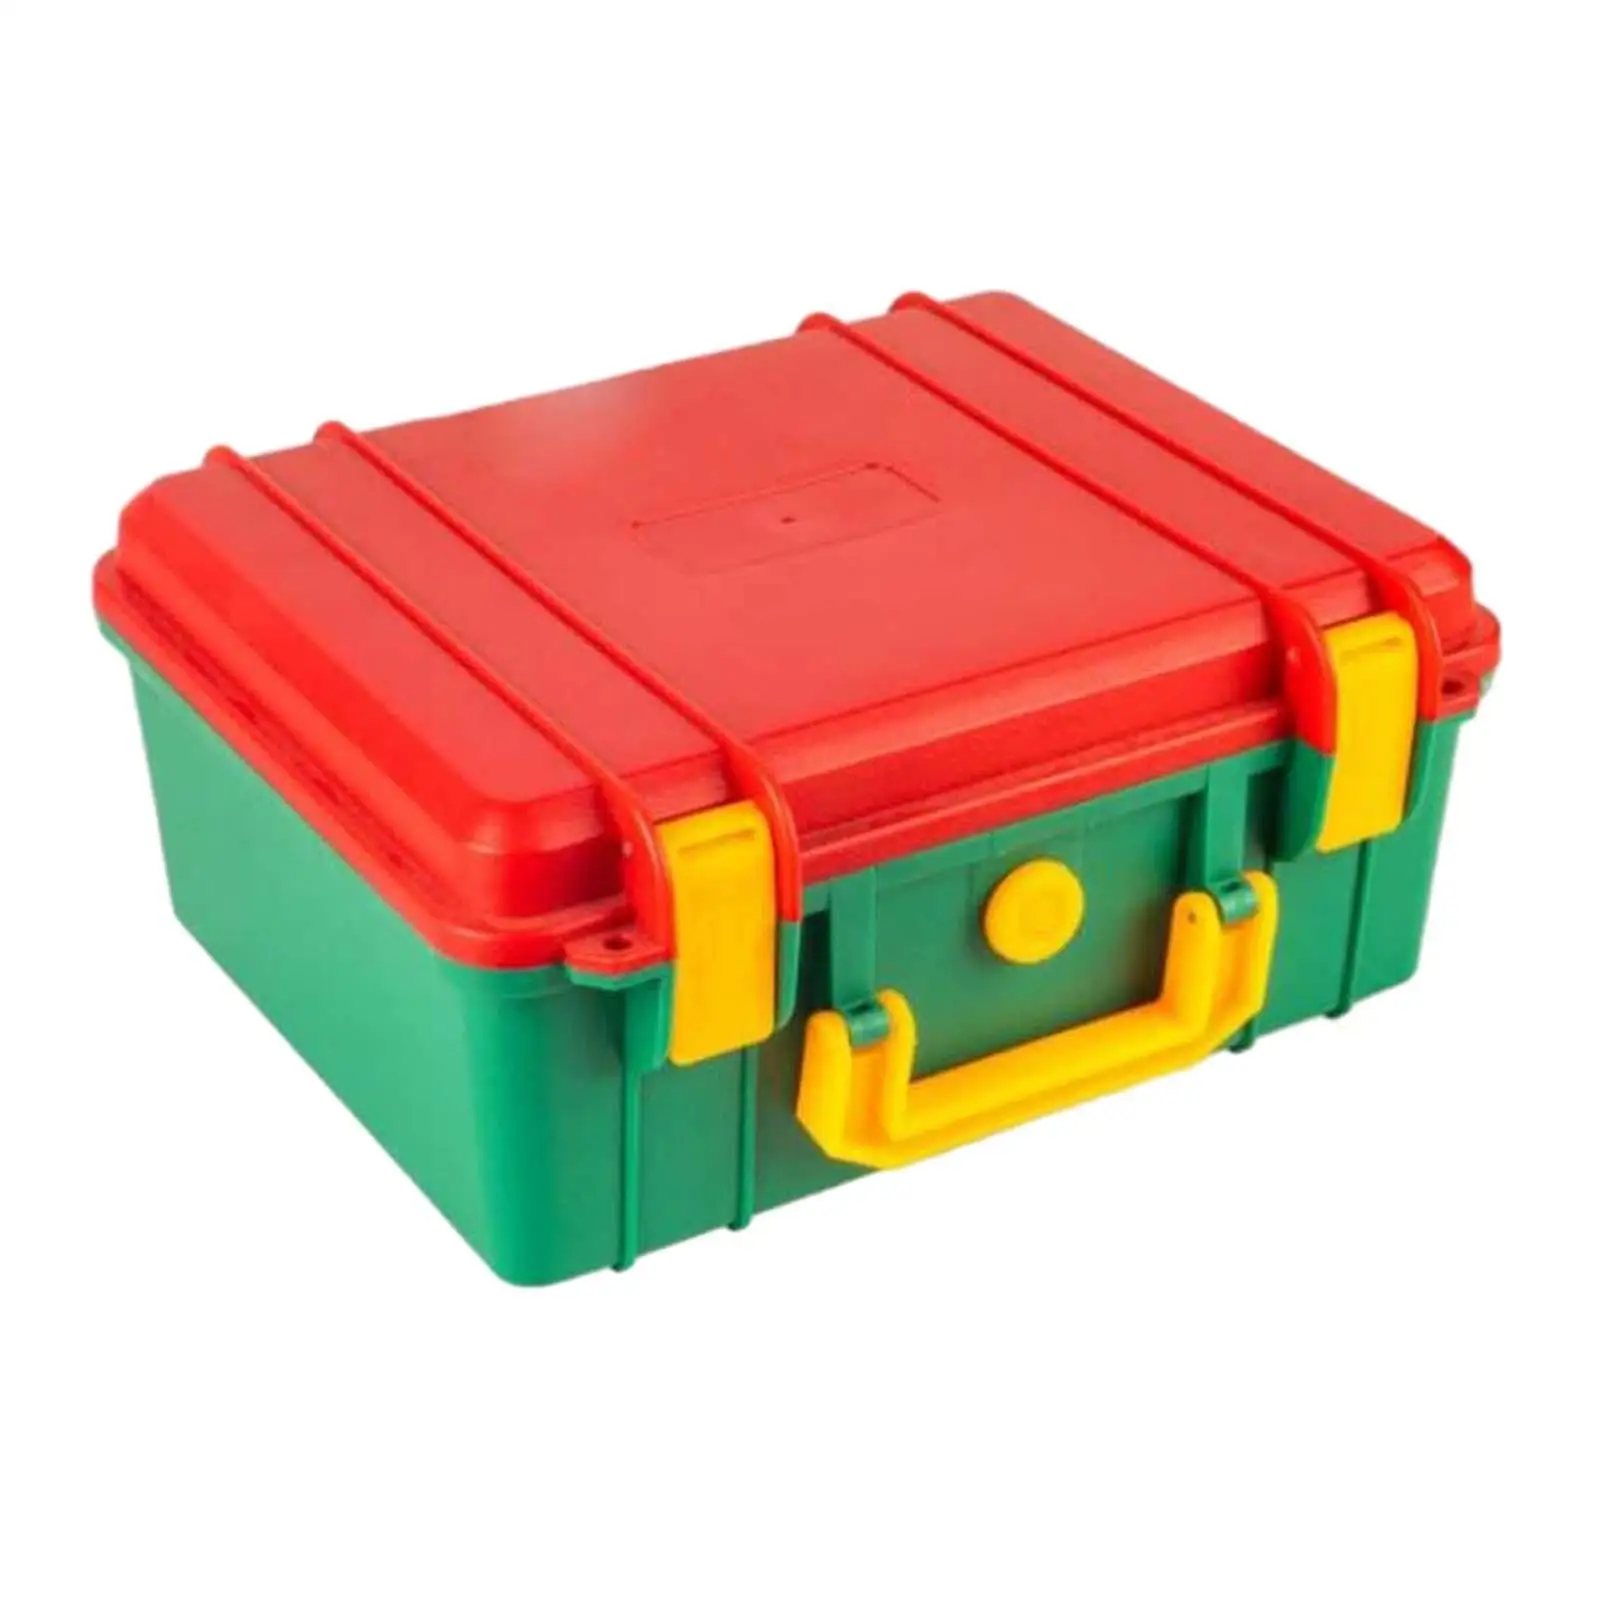 Tool Case with Sponge Electrician Repairs Box Protective Hardware Organizer Toolbox Storage Box for Outdoor Household Instrument